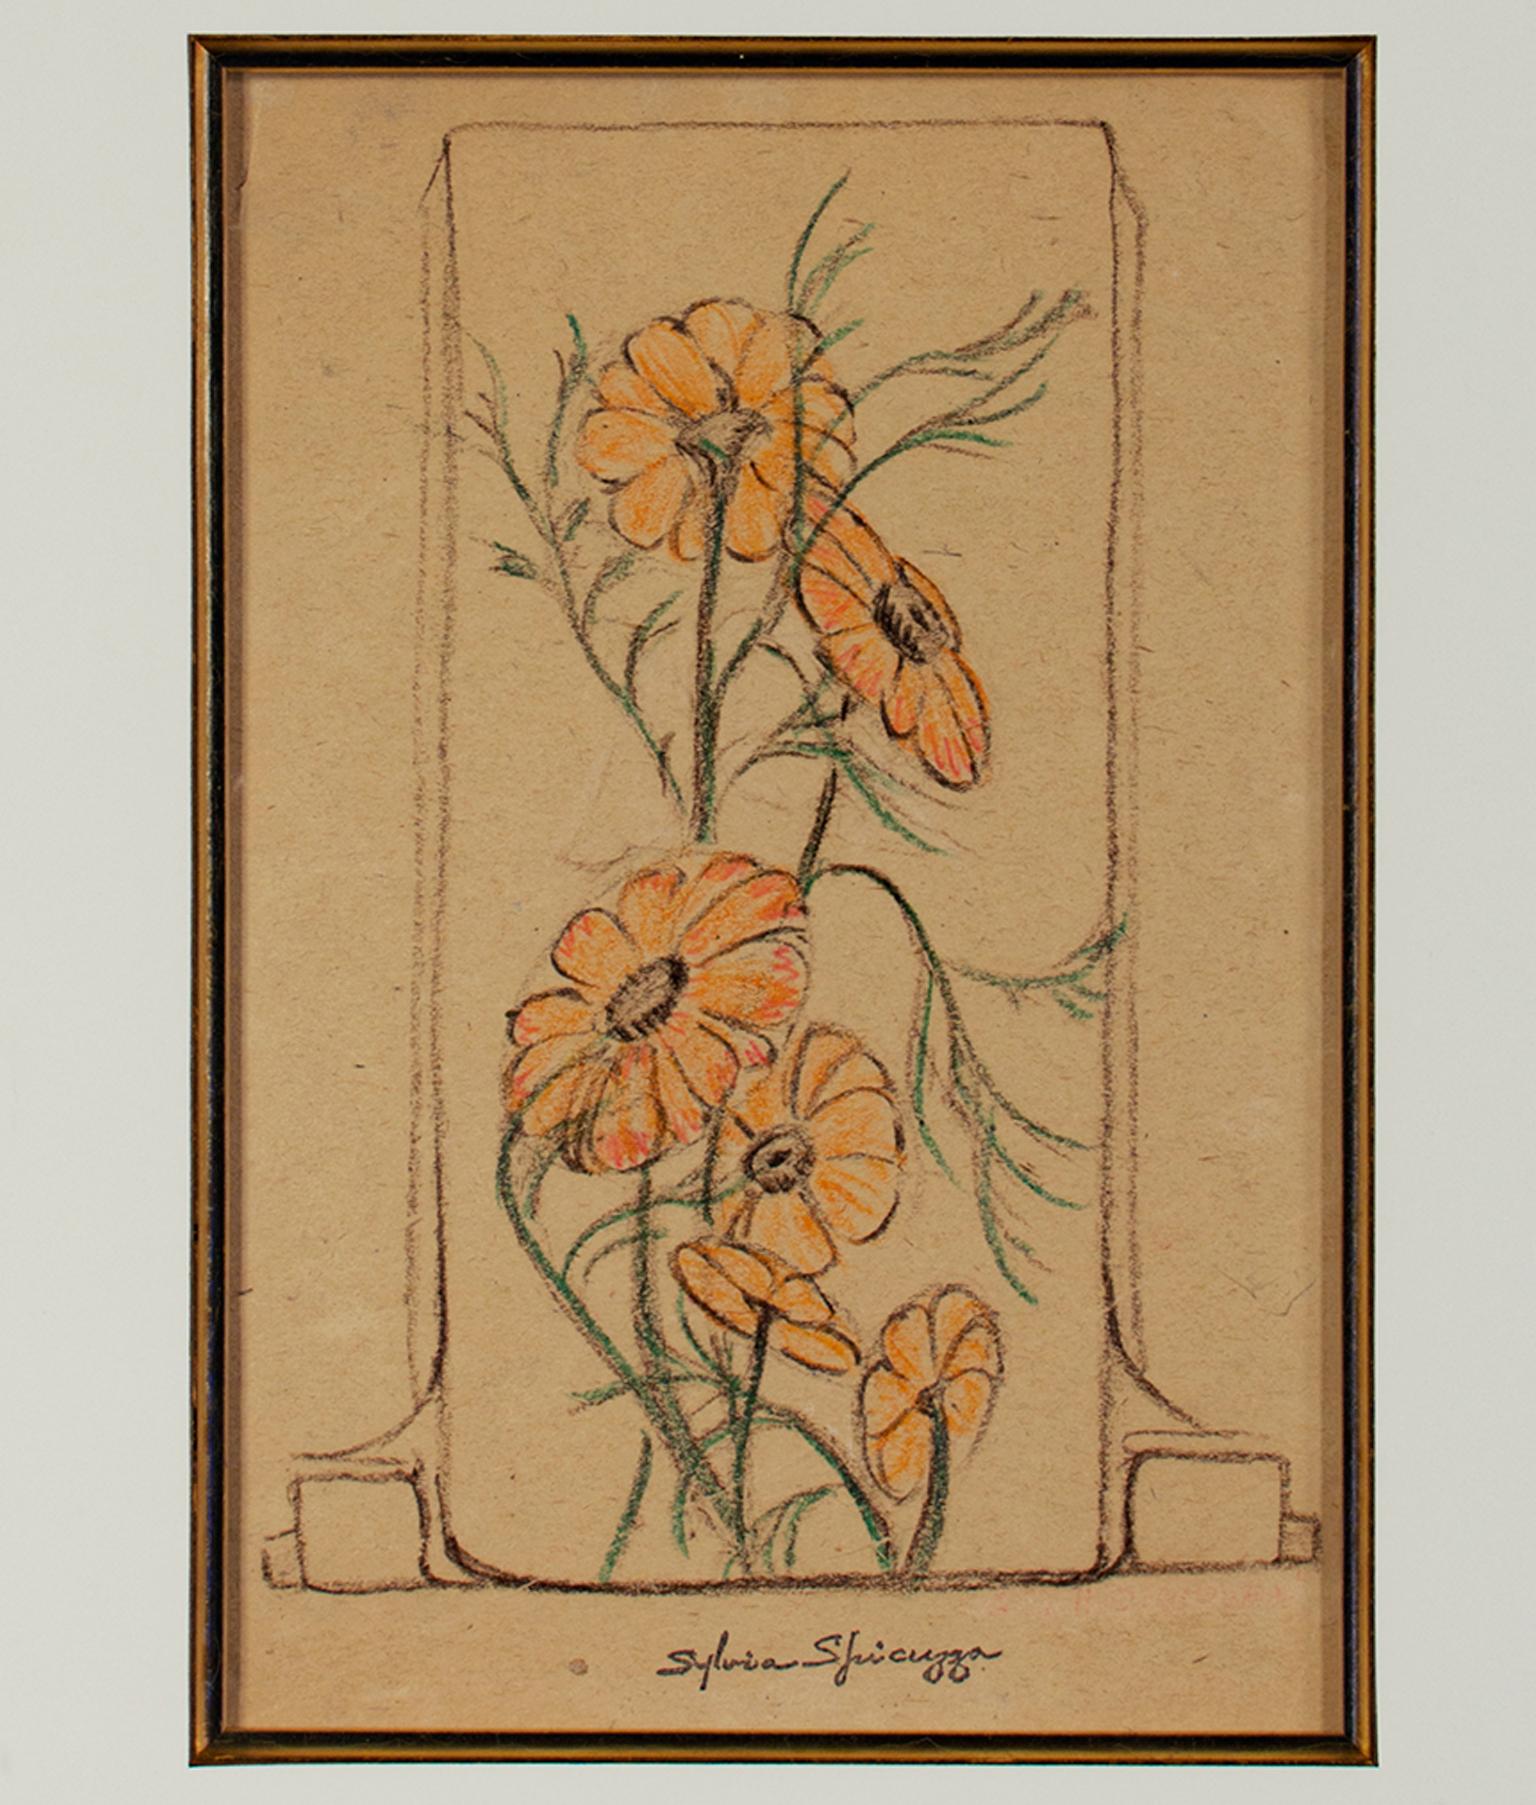 "Art Deco Daisies" is an original crayon drawing on brown paper by Sylvia Spicuzza with a stamped signature long the center lower edge. Framed in delicate lines, the orange daisies rise from the bottom edge. The stems intertwine and flow upward,